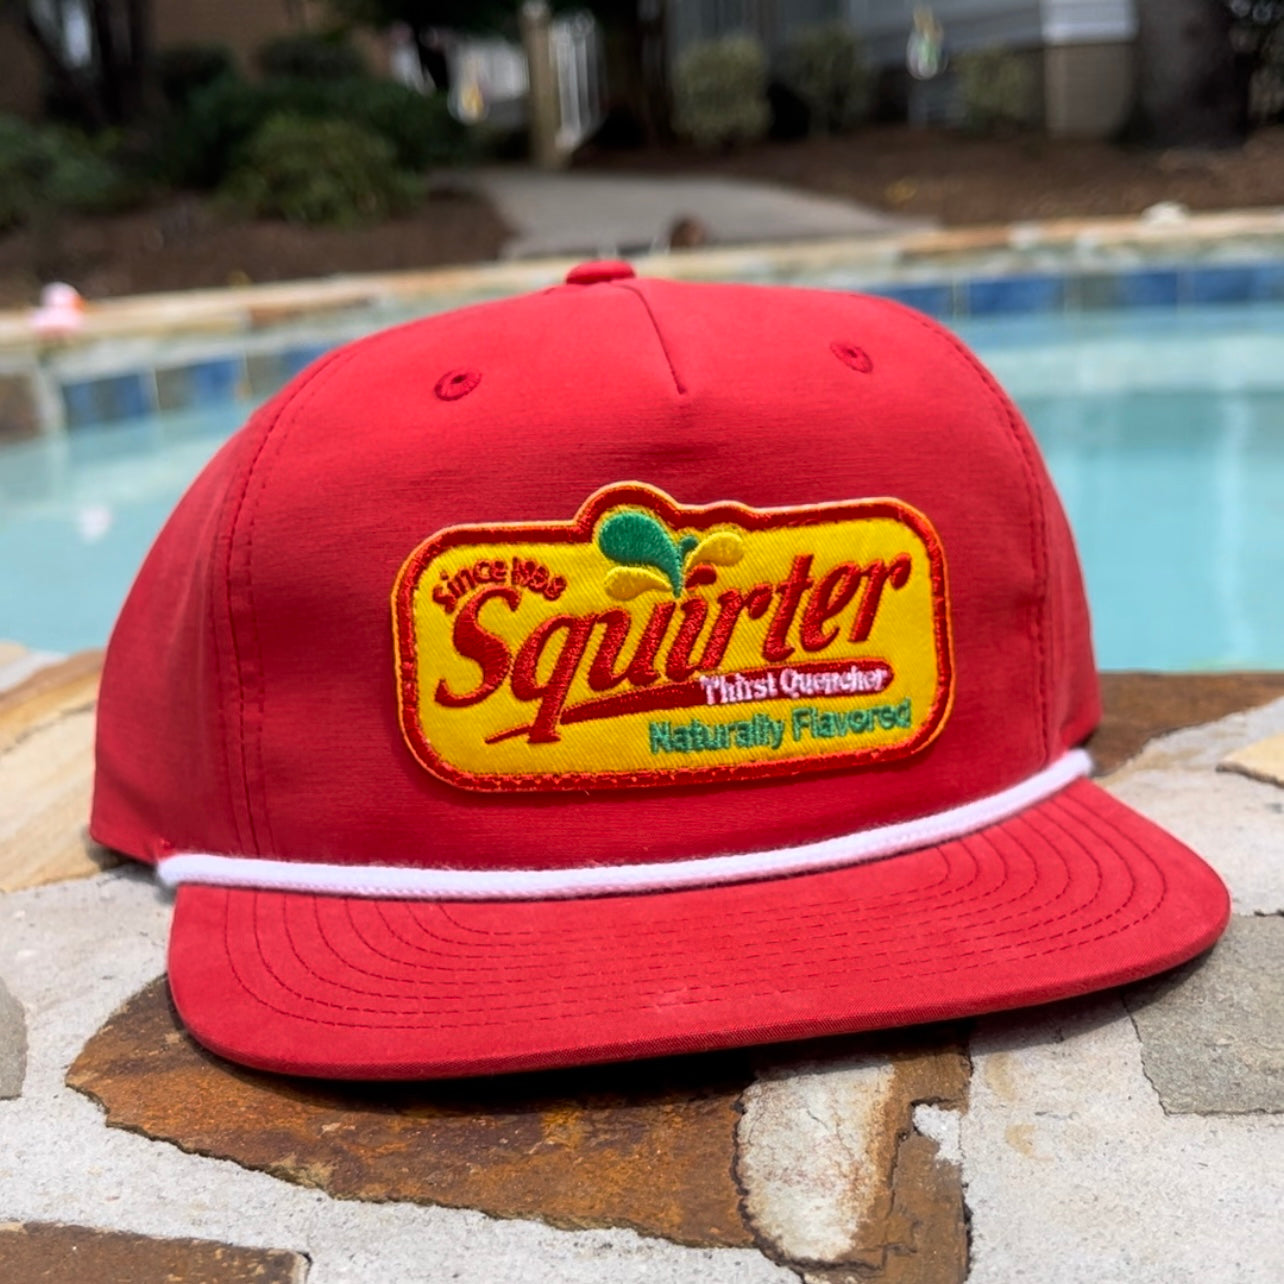 TTC Since 1988 Squirter - 256 red/ white